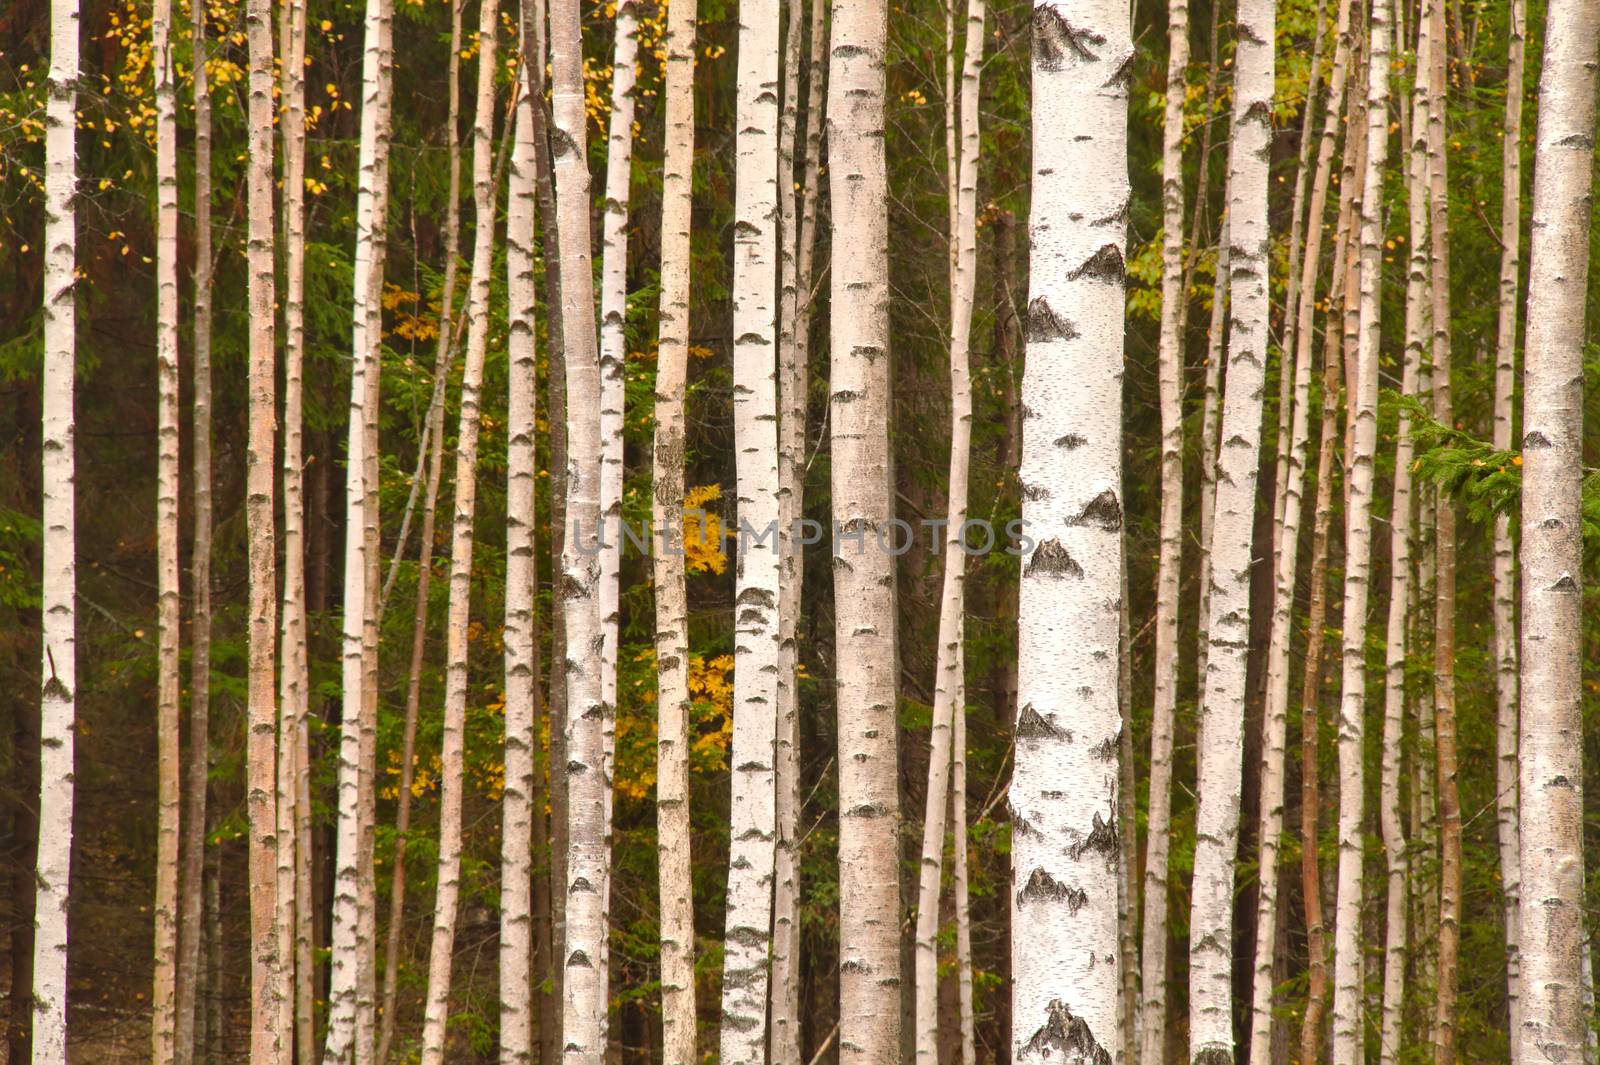 Nice young birch forest in fall with some yellow autumn leaves